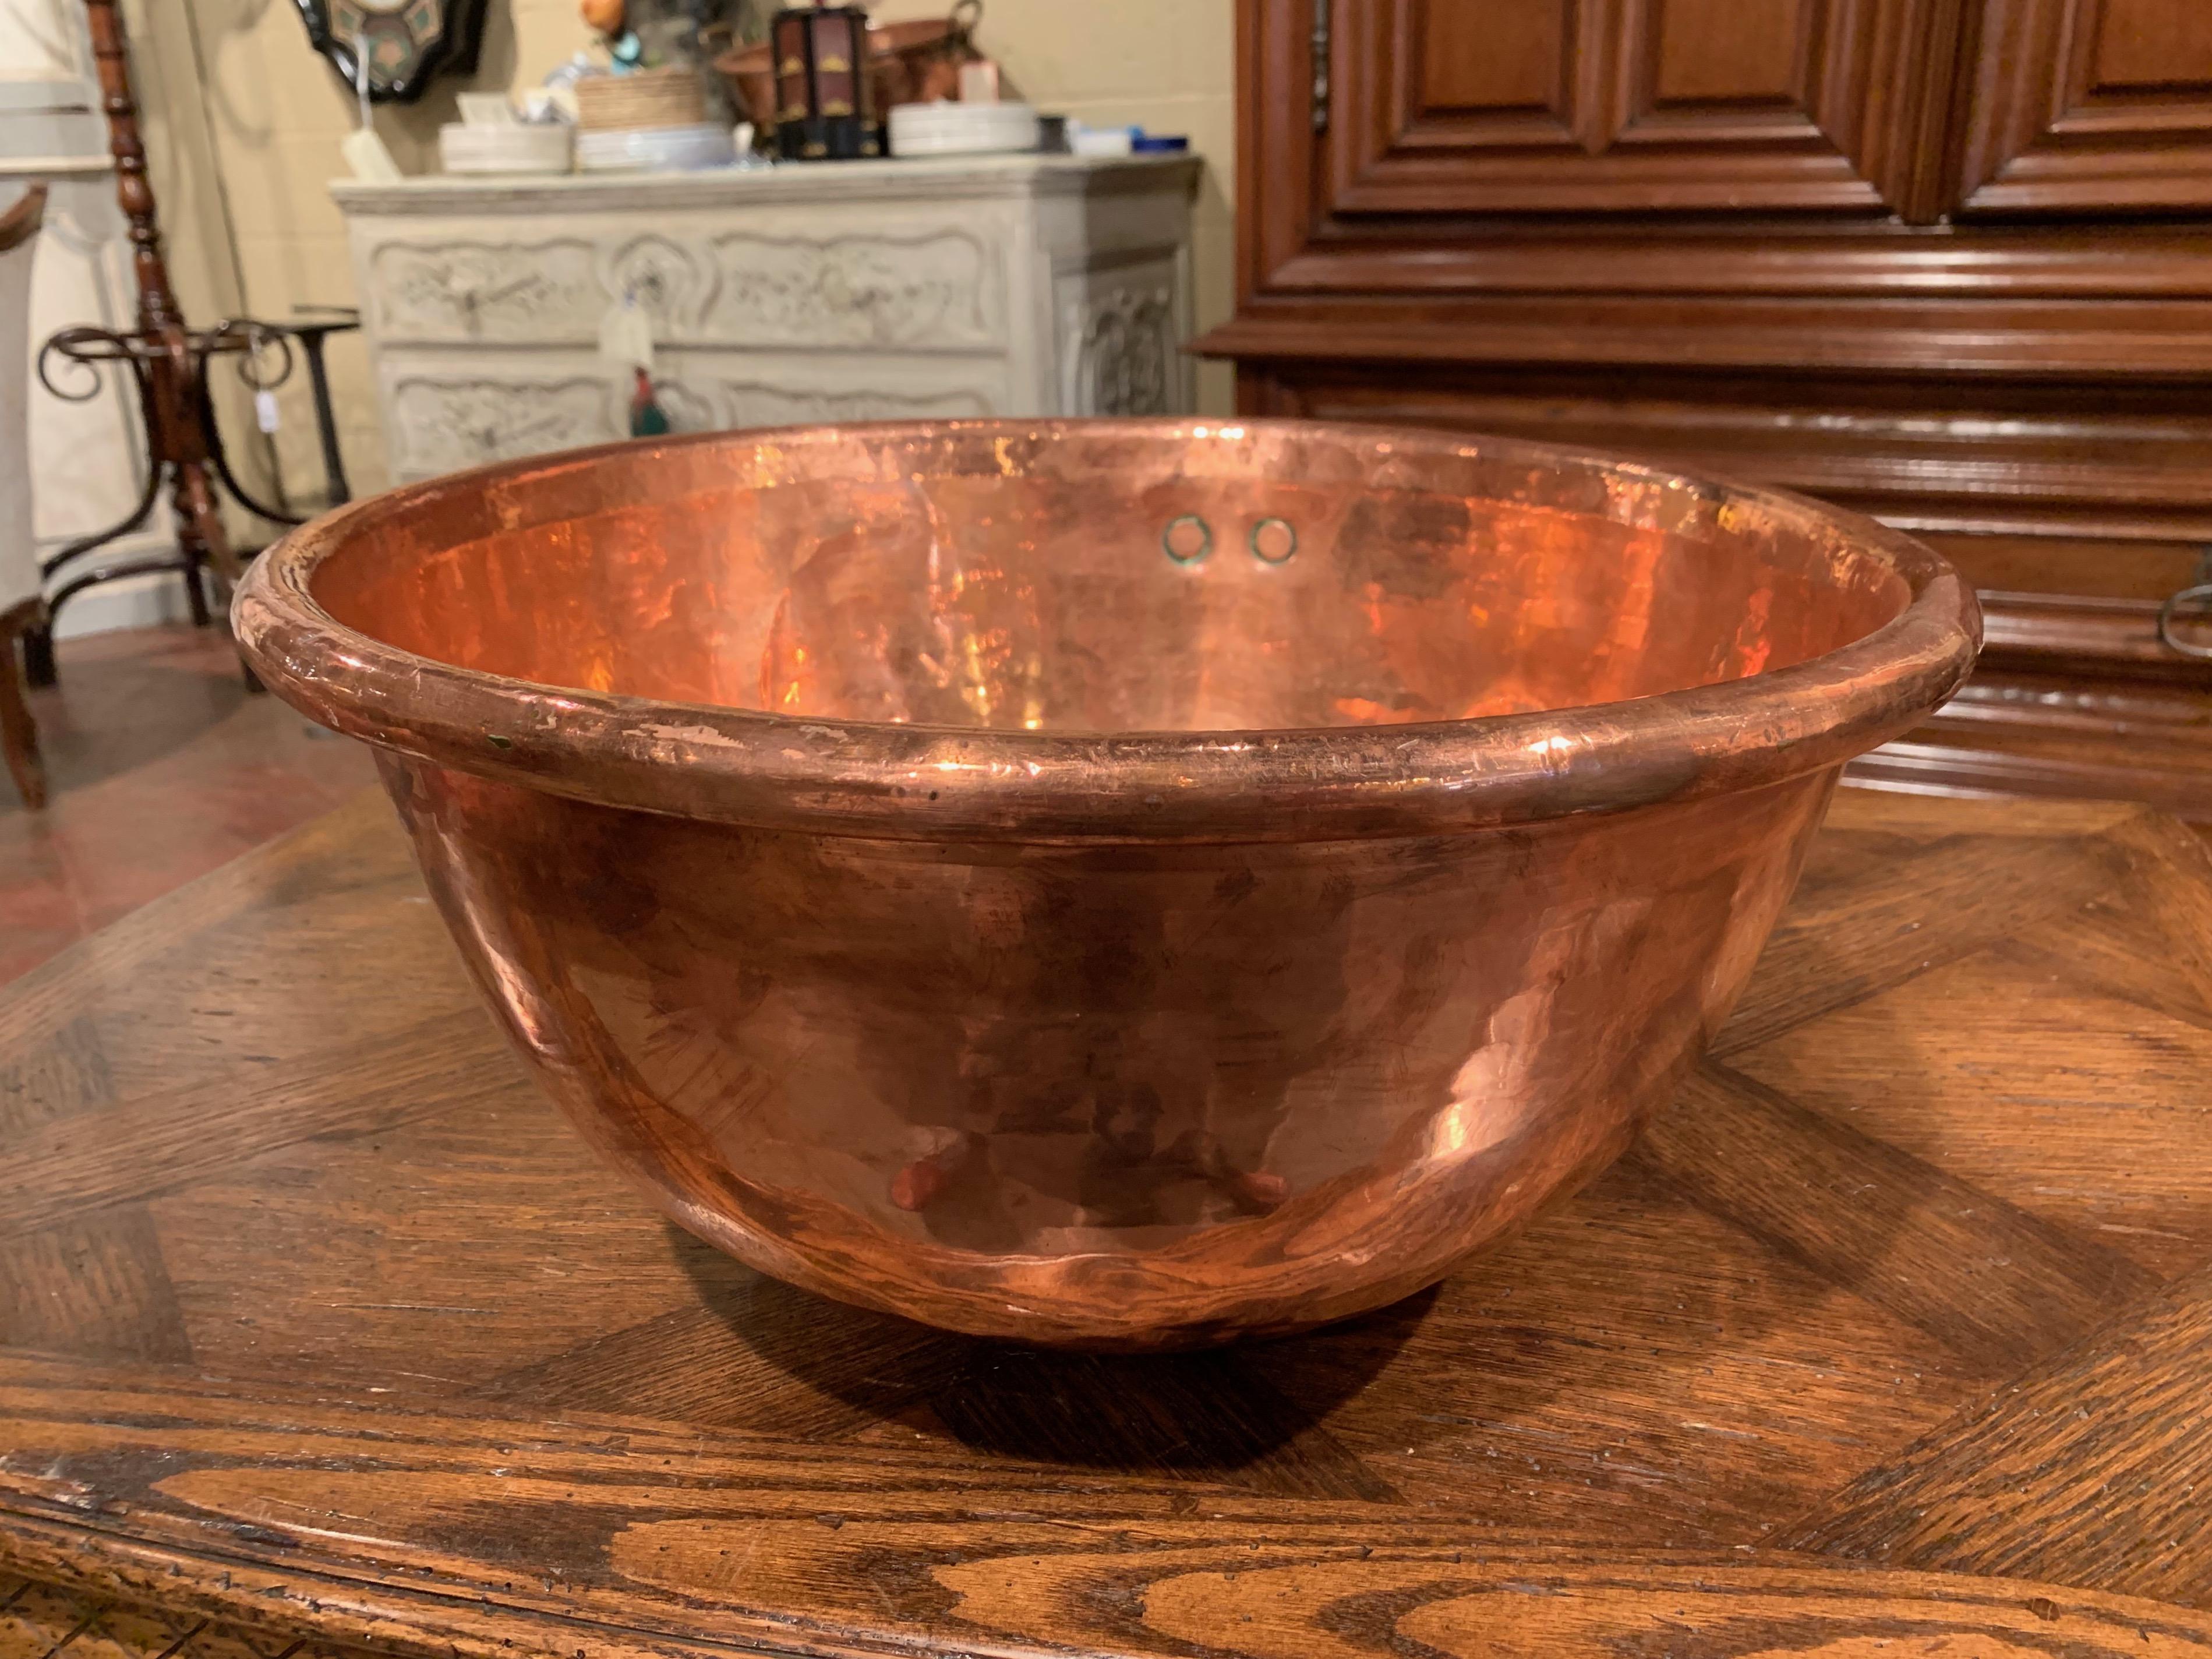 Hand-Crafted 19th Century French Copper Jelly Bowl from Normandy For Sale